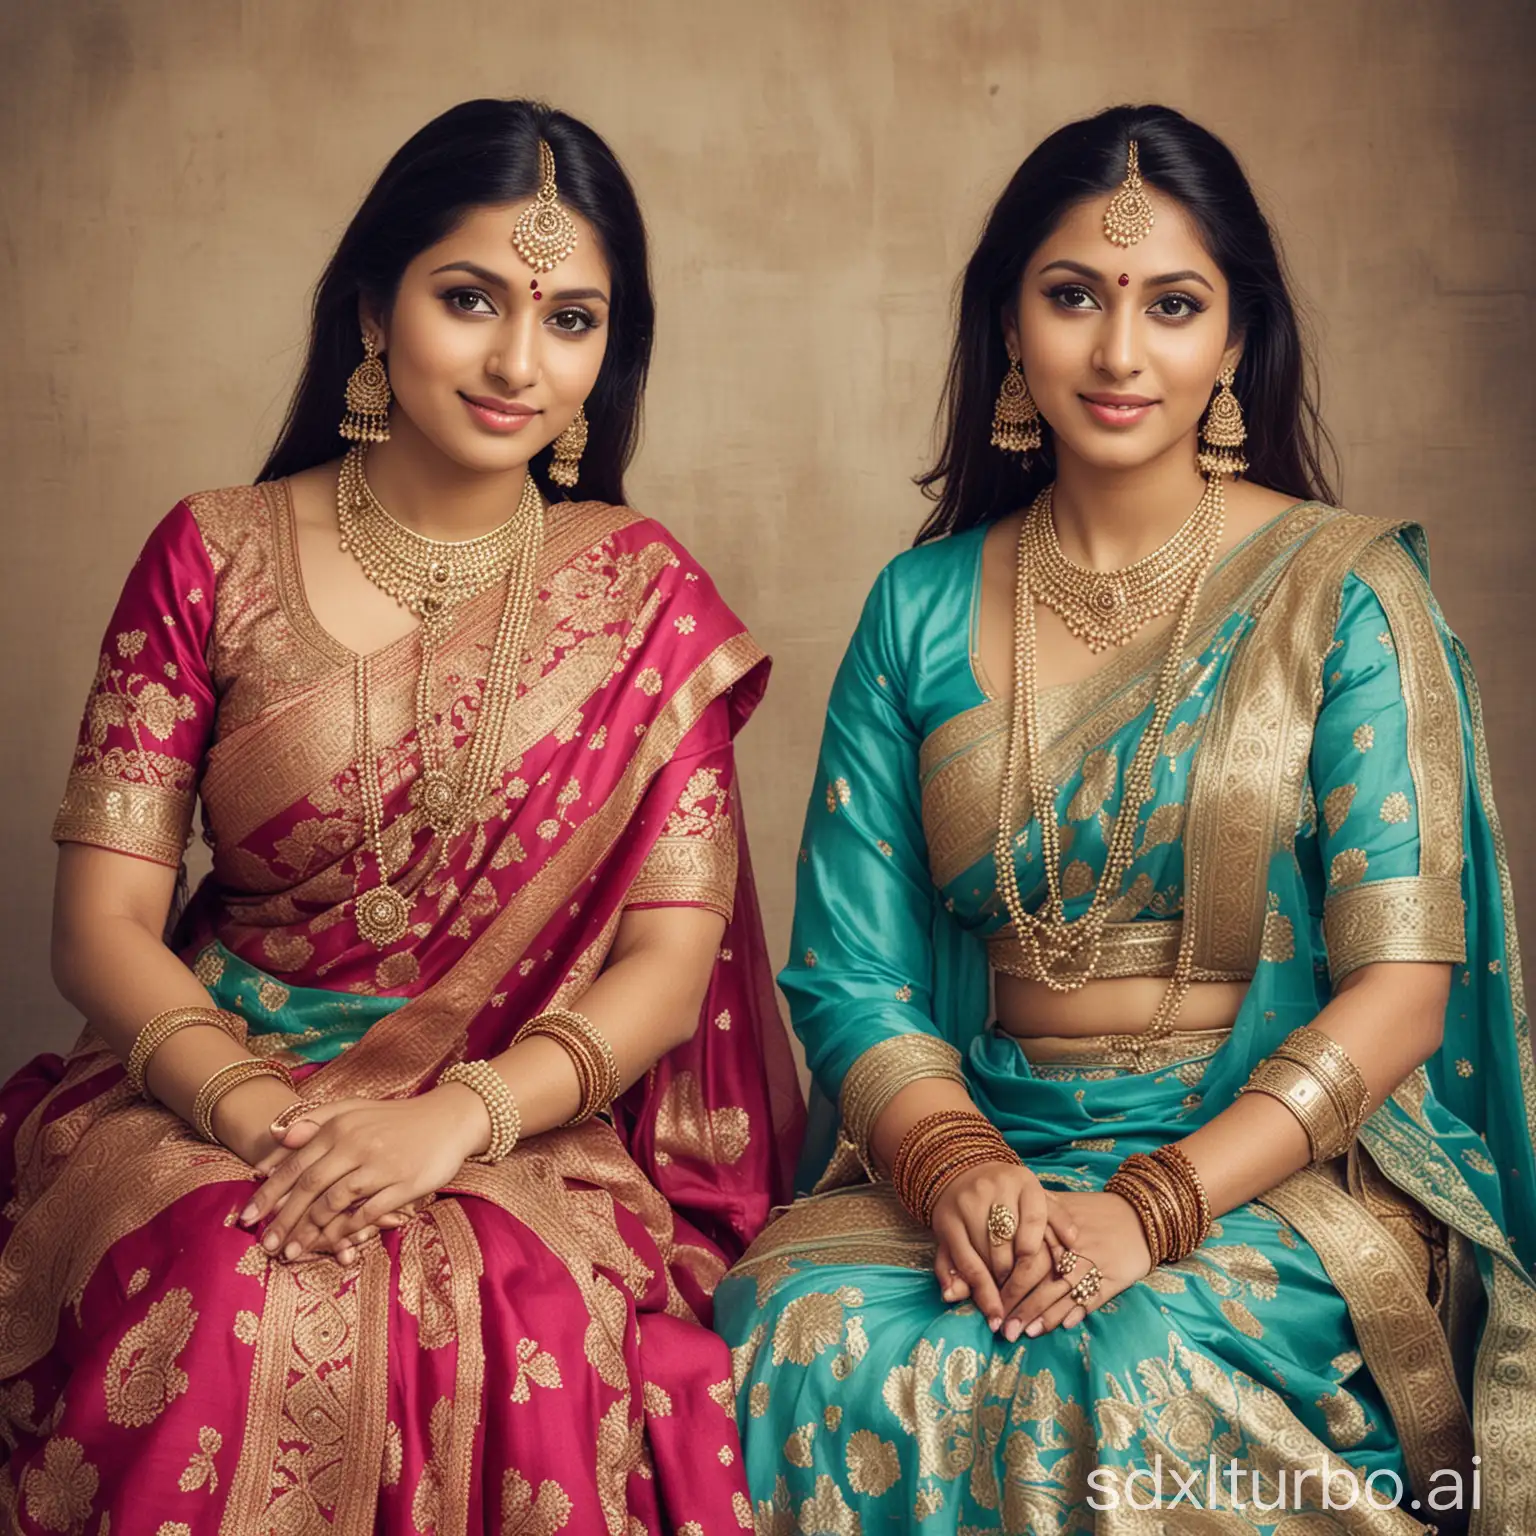 Two beautiful Indian women wearing traditional Eastern garments, likely sarees or similar attire. They are sitting down and posing for the picture. The women have ornate and colorful clothing, showcasing cultural and religious elements.